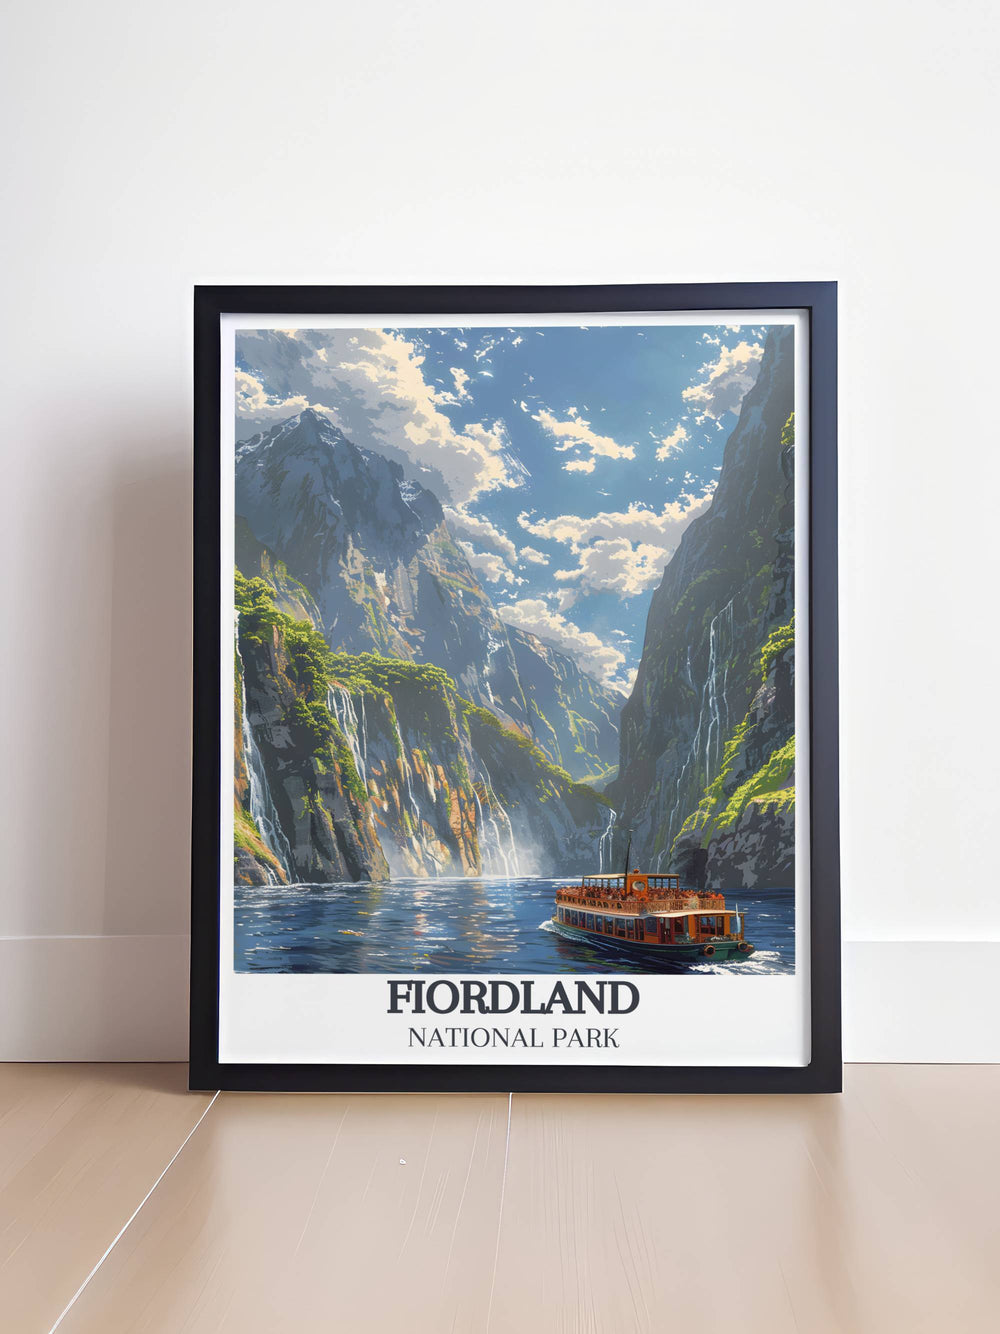  Milford Sound at dawn, light casting golden hues over Mitre Peak and calm waters, beautifully captured in this high quality art print.